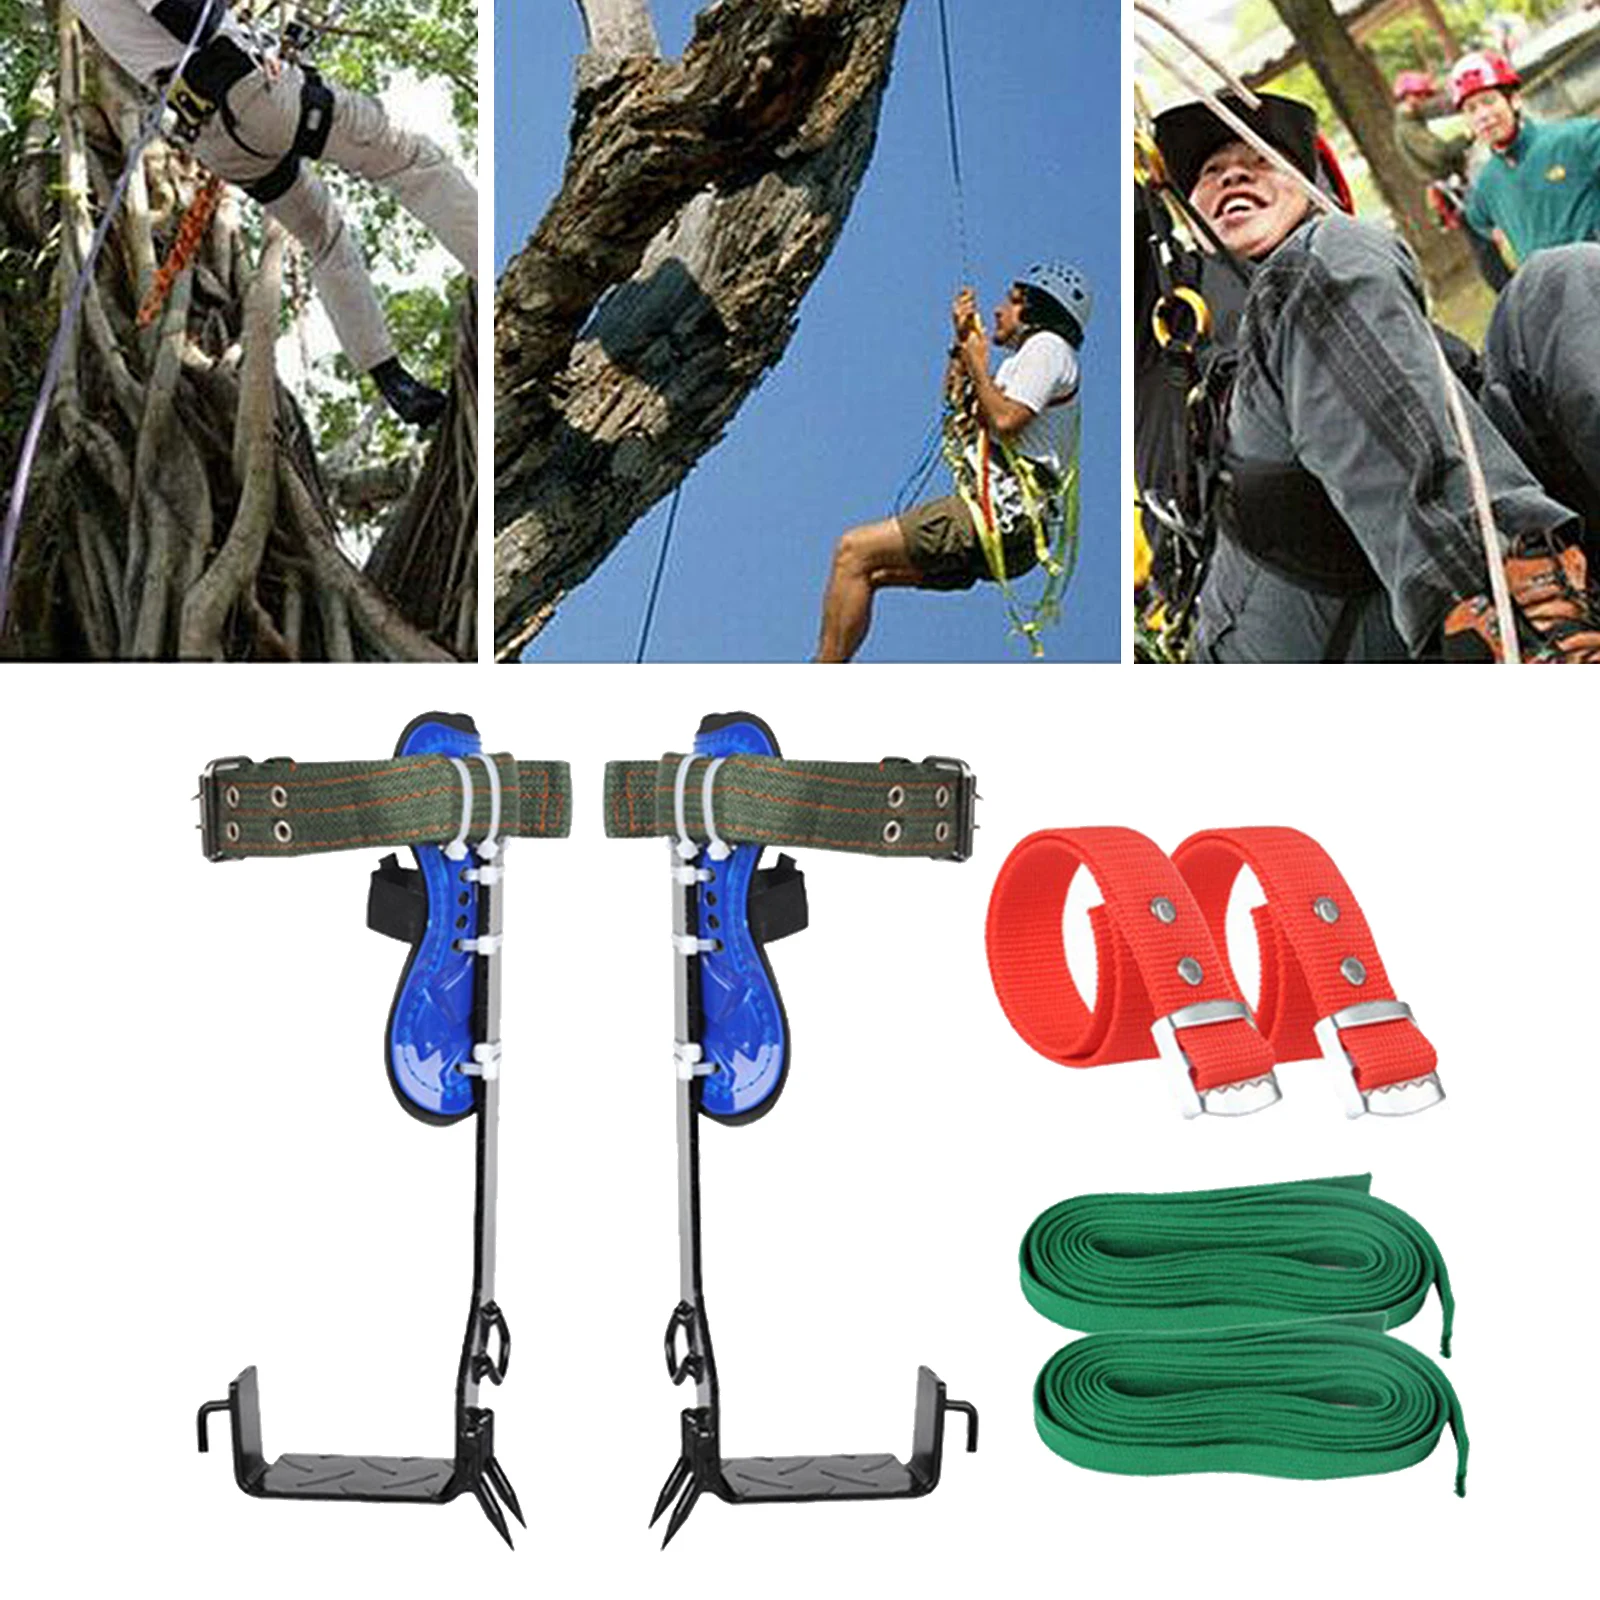 dailymall 1PC Tree Climbing 100KG Hard Loading for Outdoor Survival 